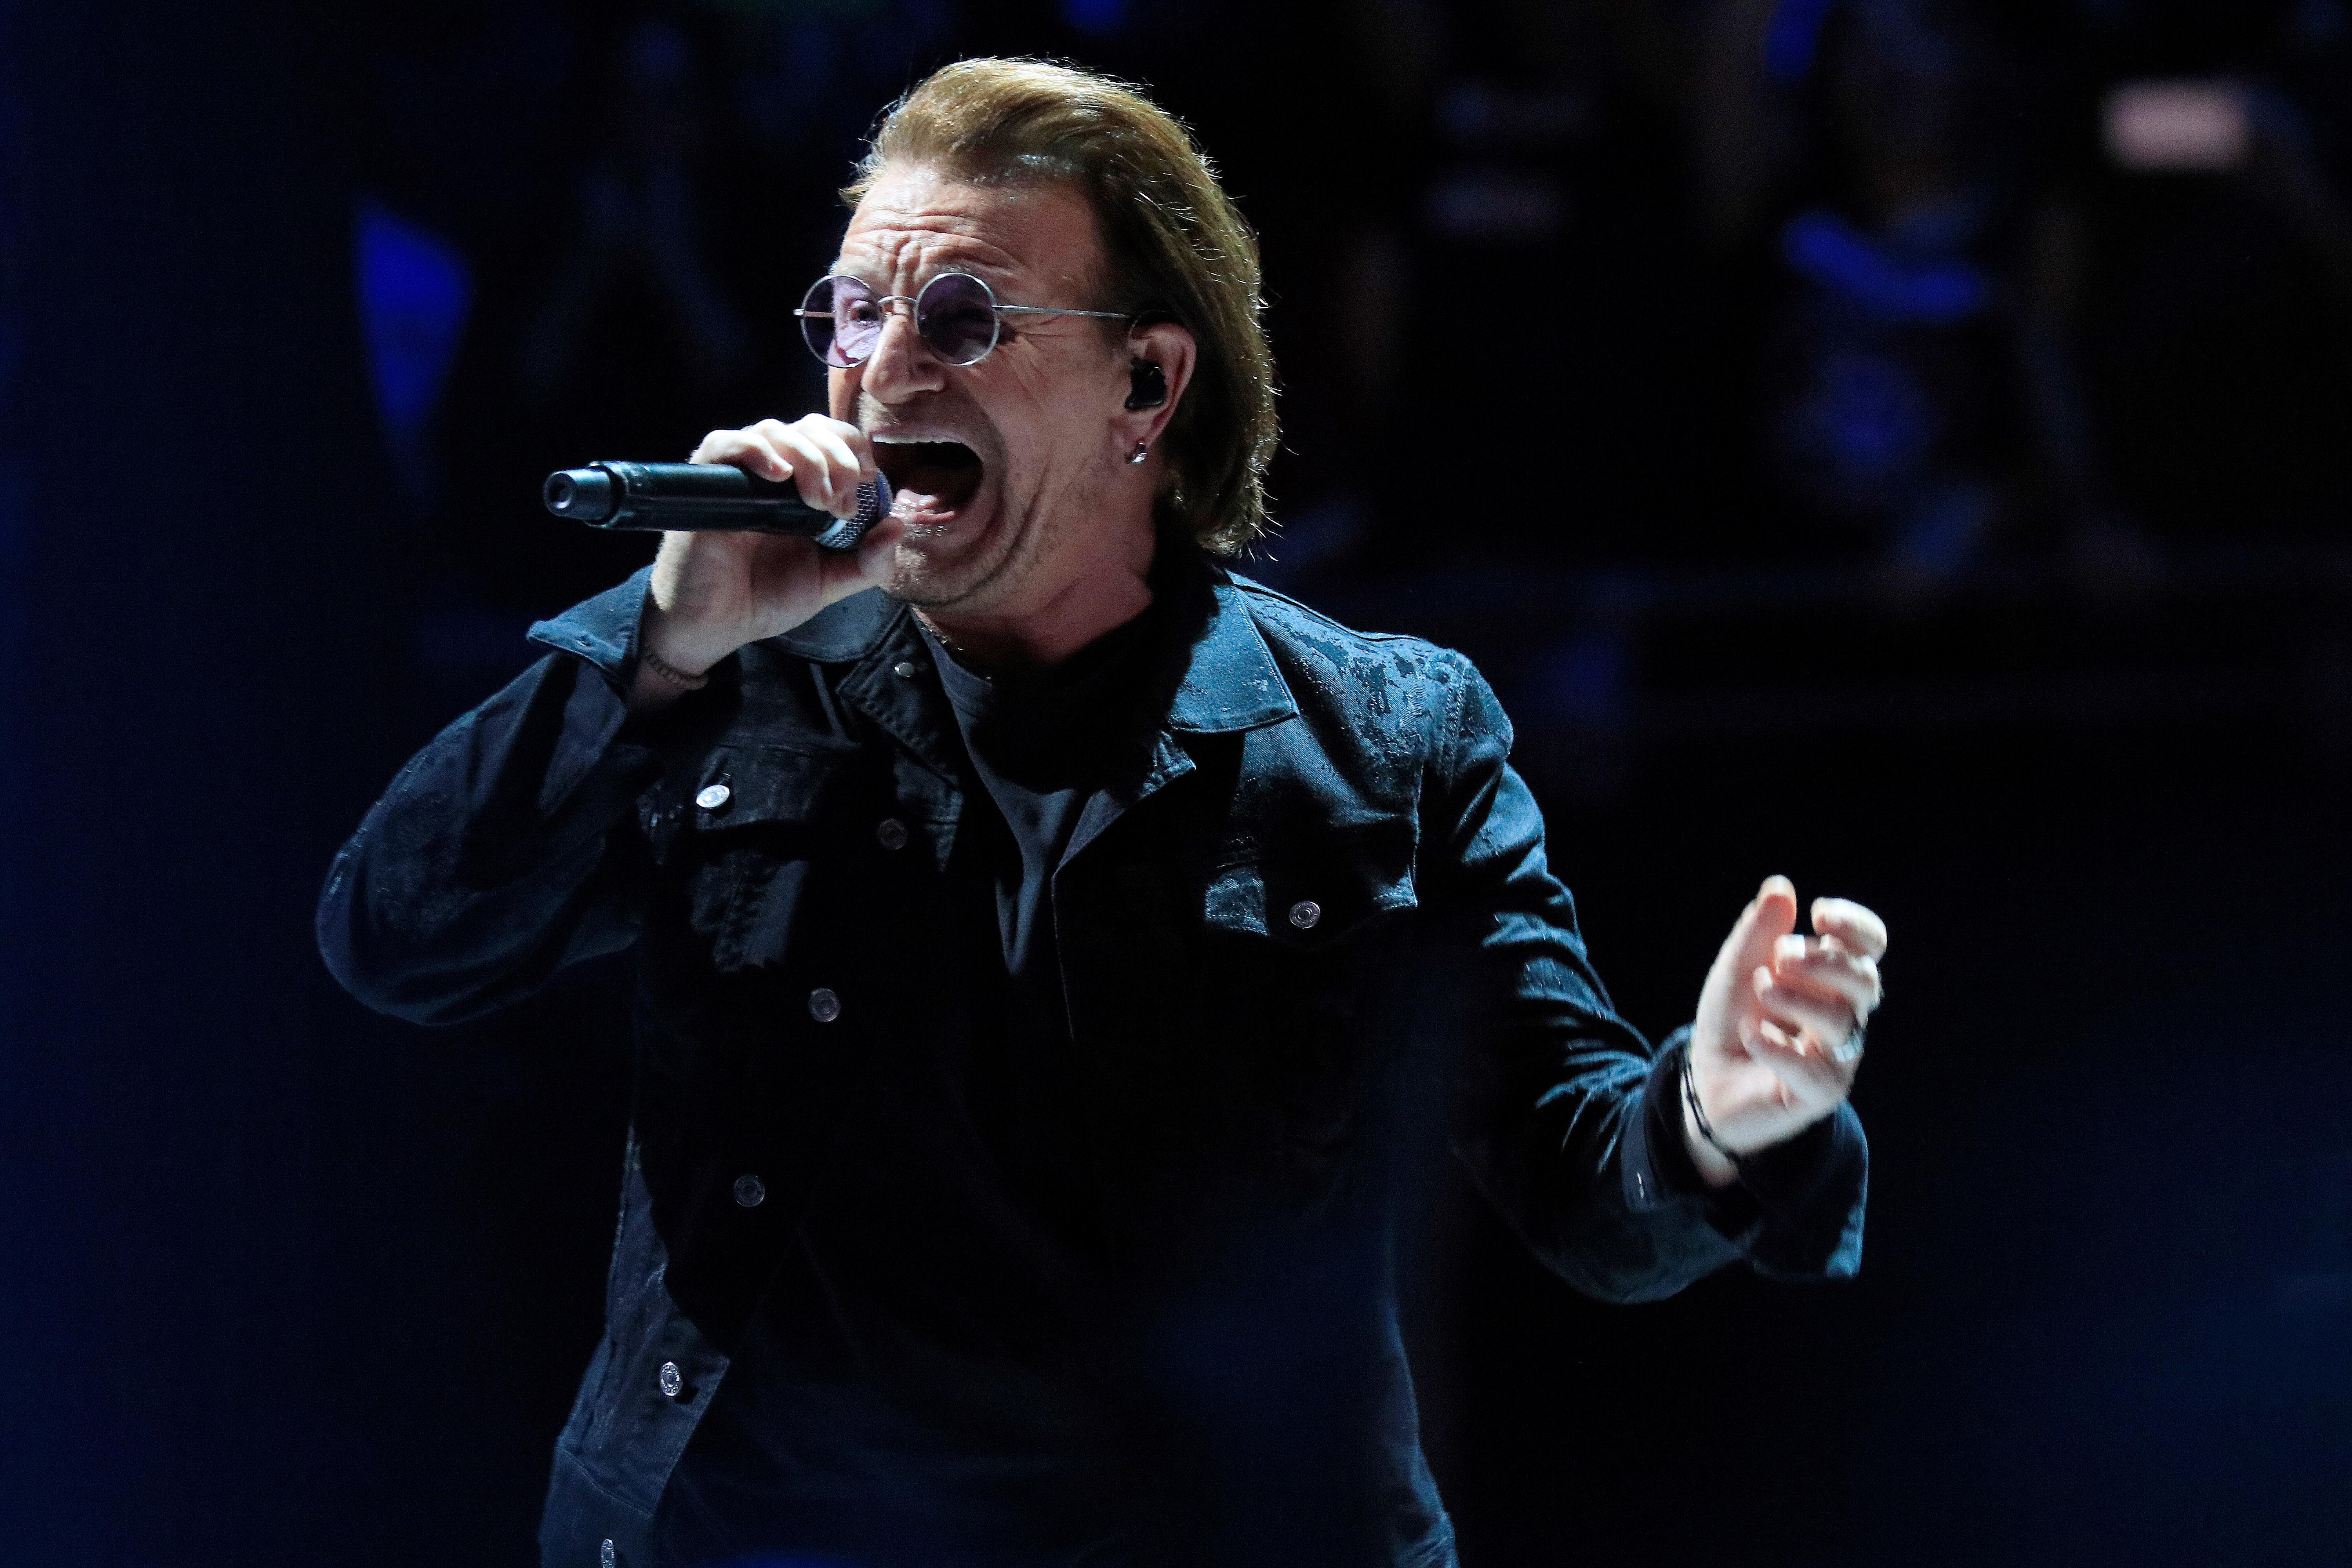 U2 censor Catalan independence images from visuals for Madrid concerts